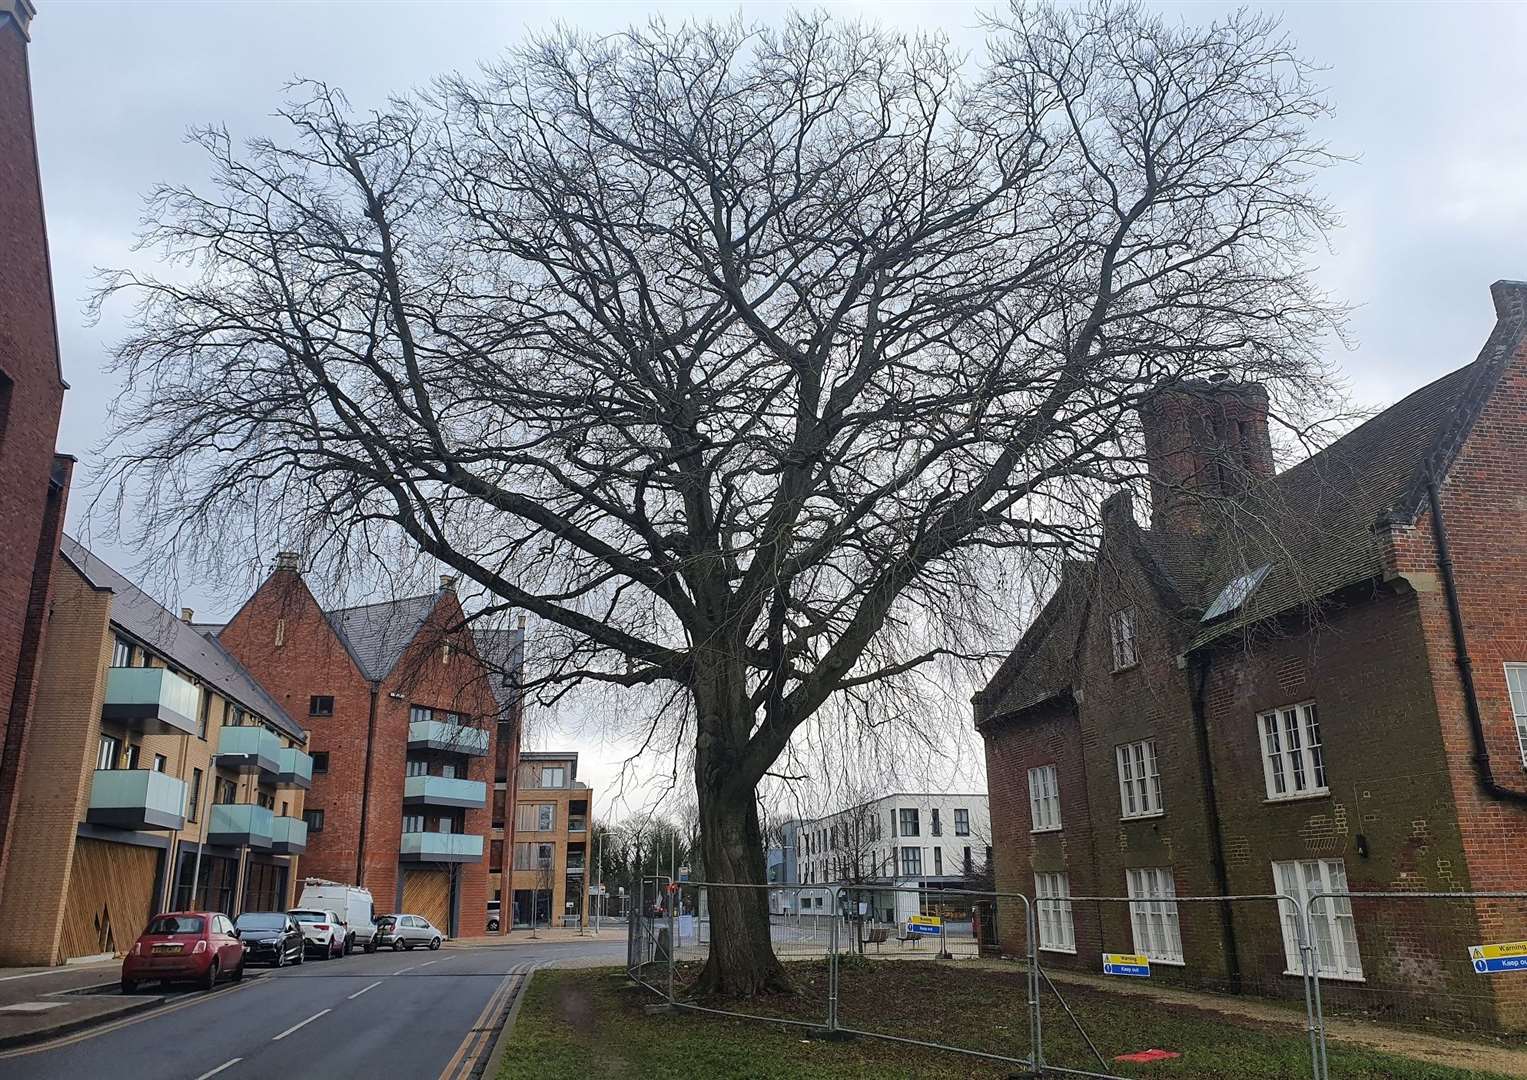 The tree stands next to the manor in Repton Avenue